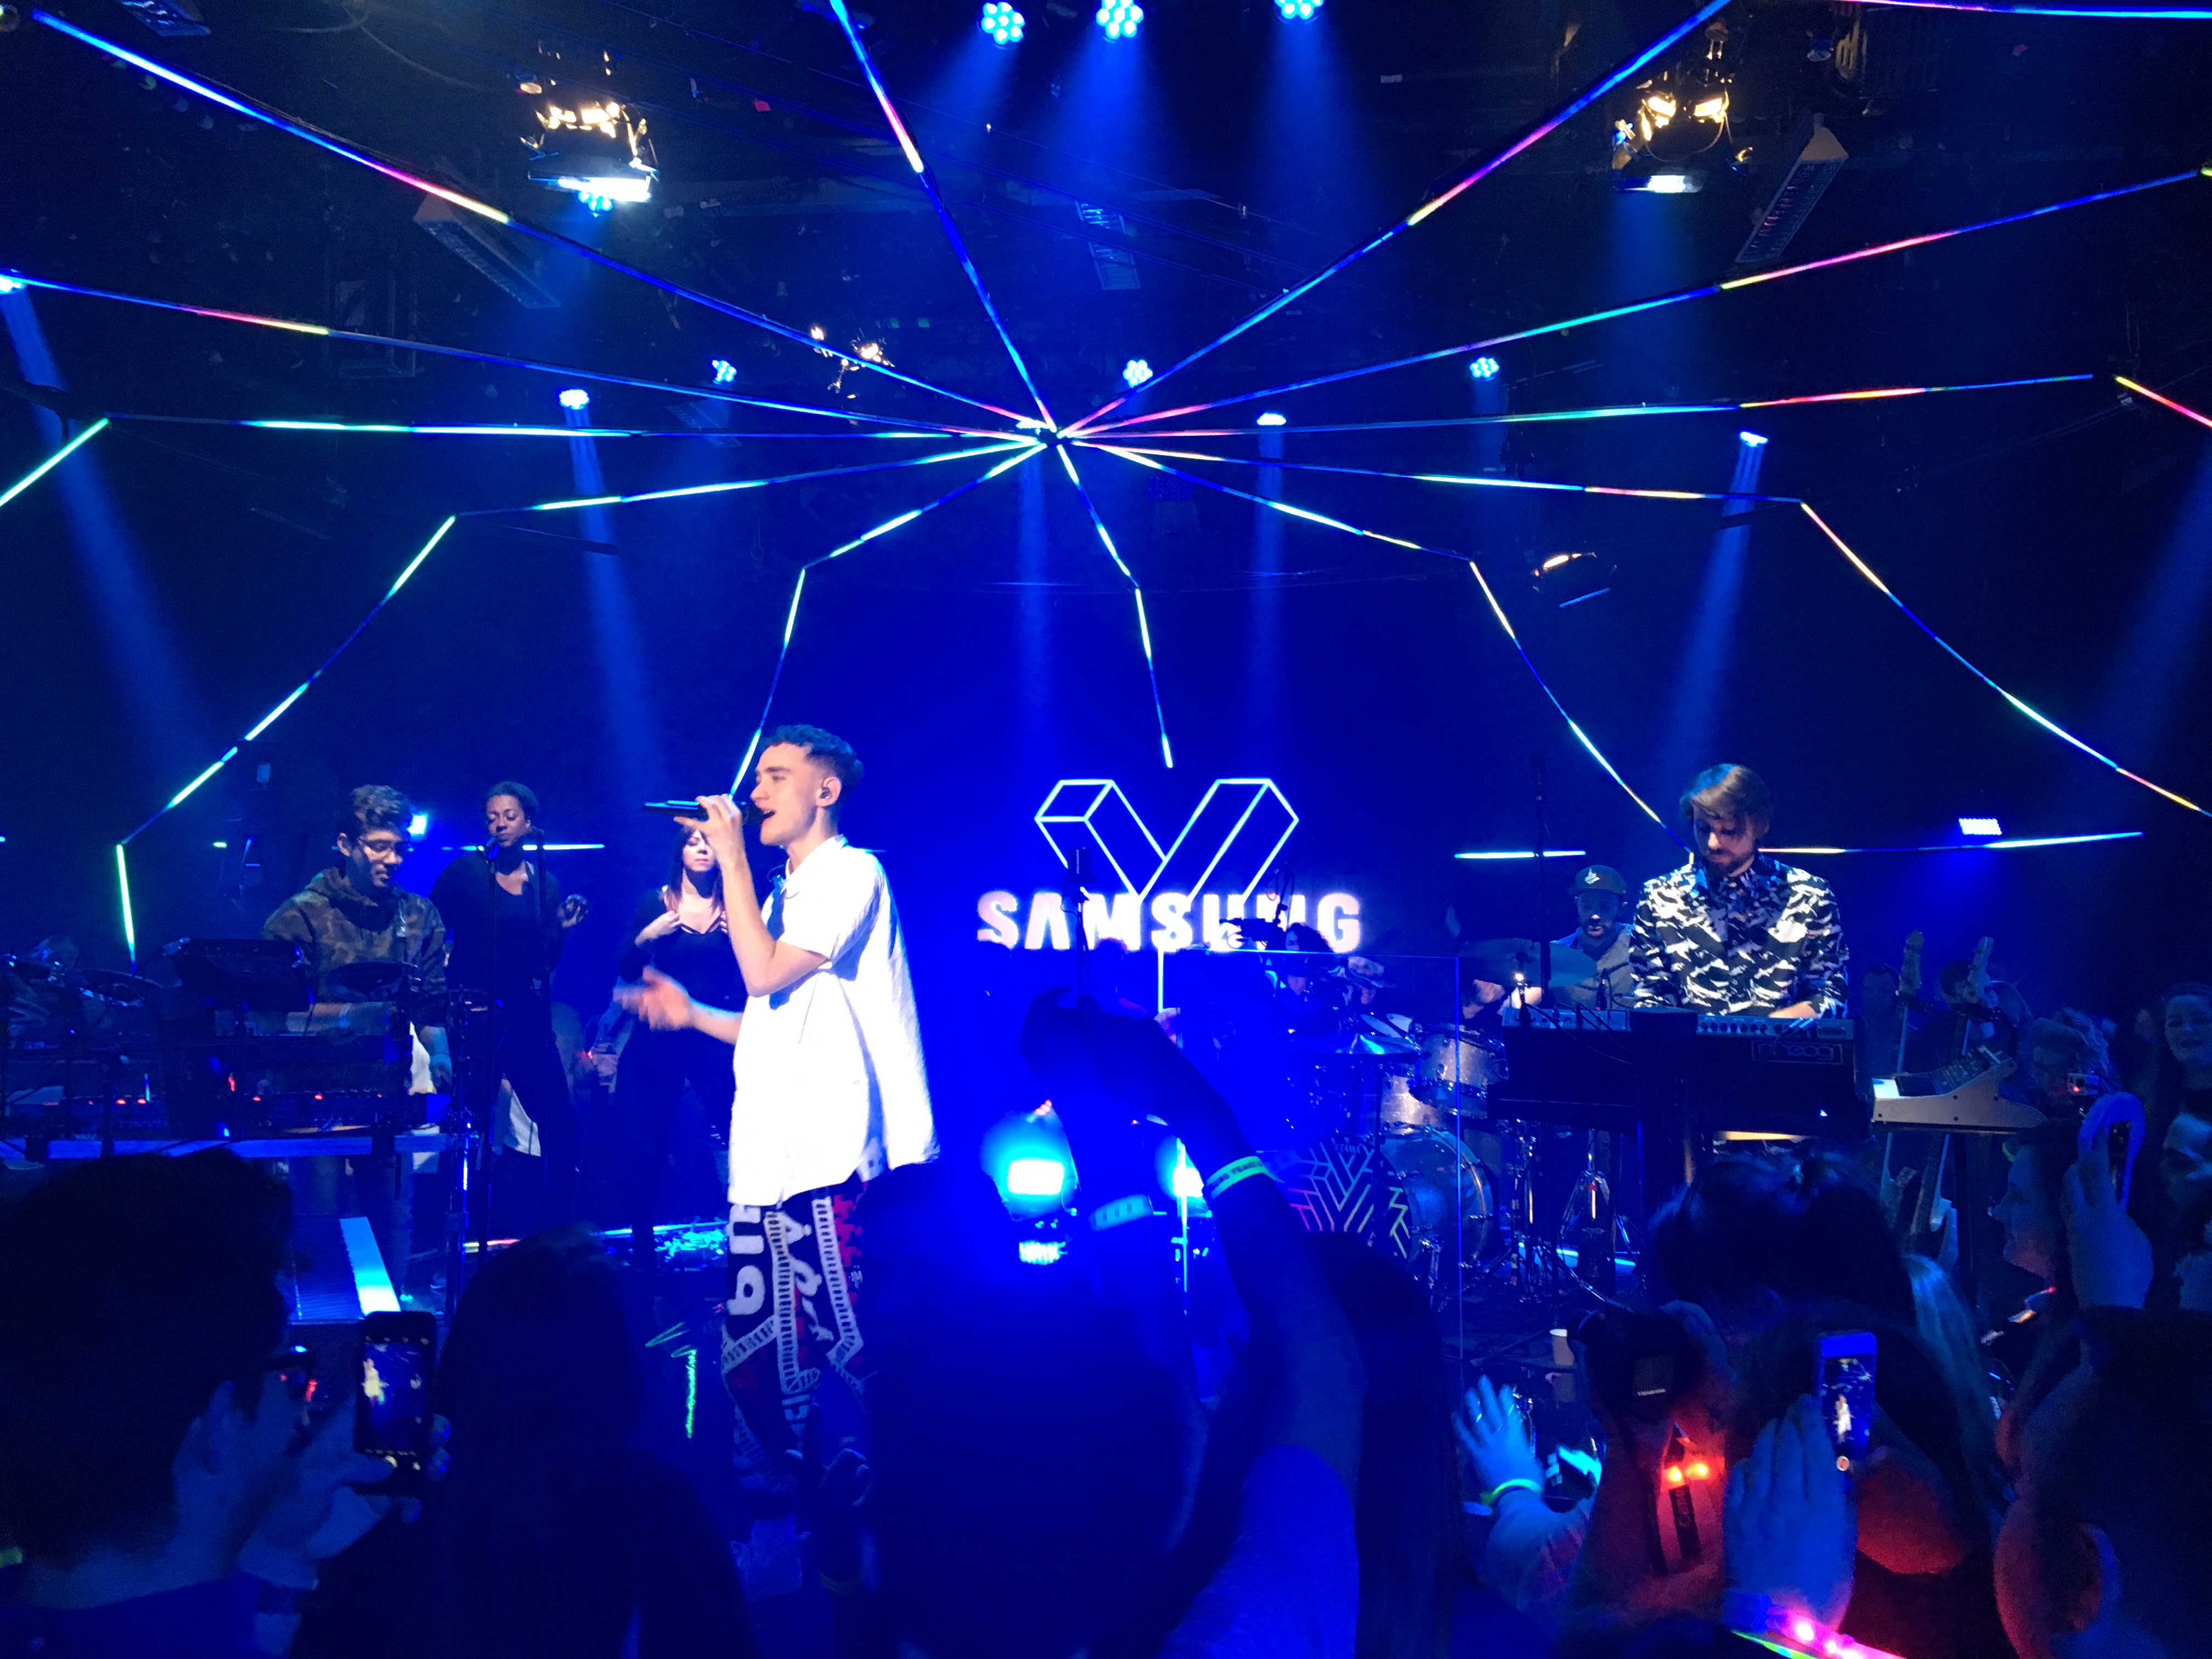 The First VR Gig with Years & Years and the Samsung S7